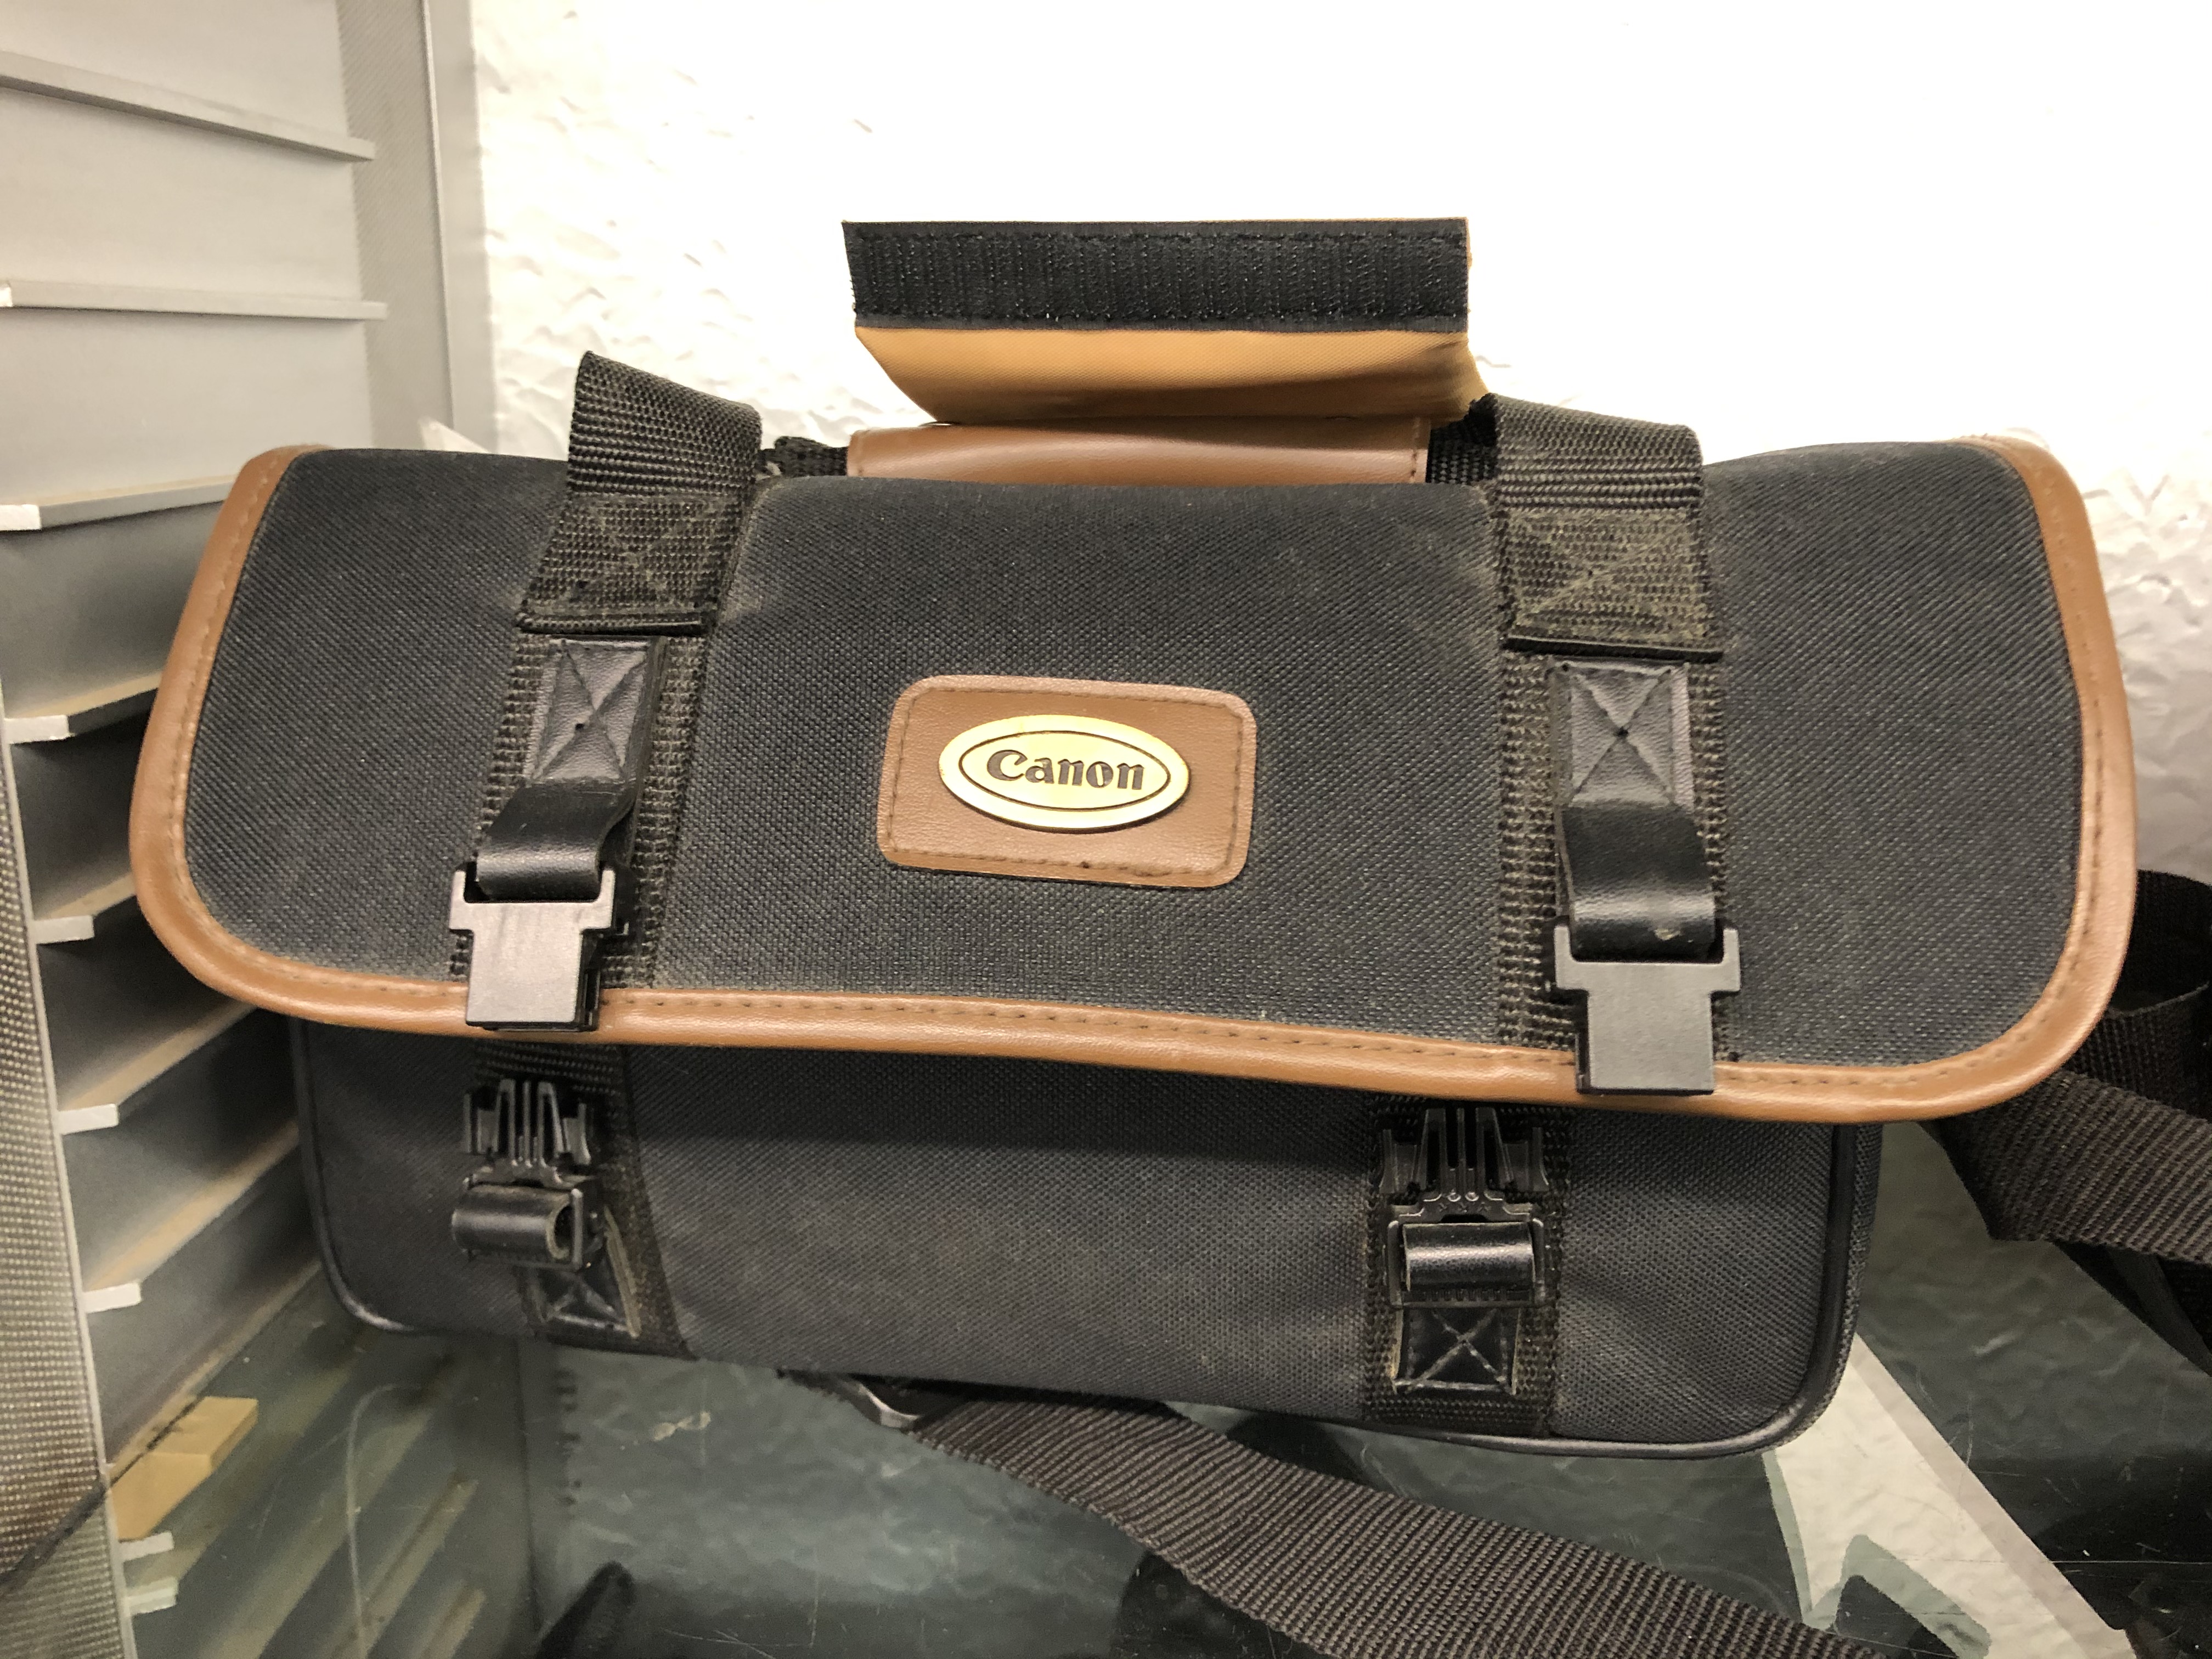 CANON 8MM VIDEO CAMCORDER IN TRAVEL BAG - Image 7 of 7